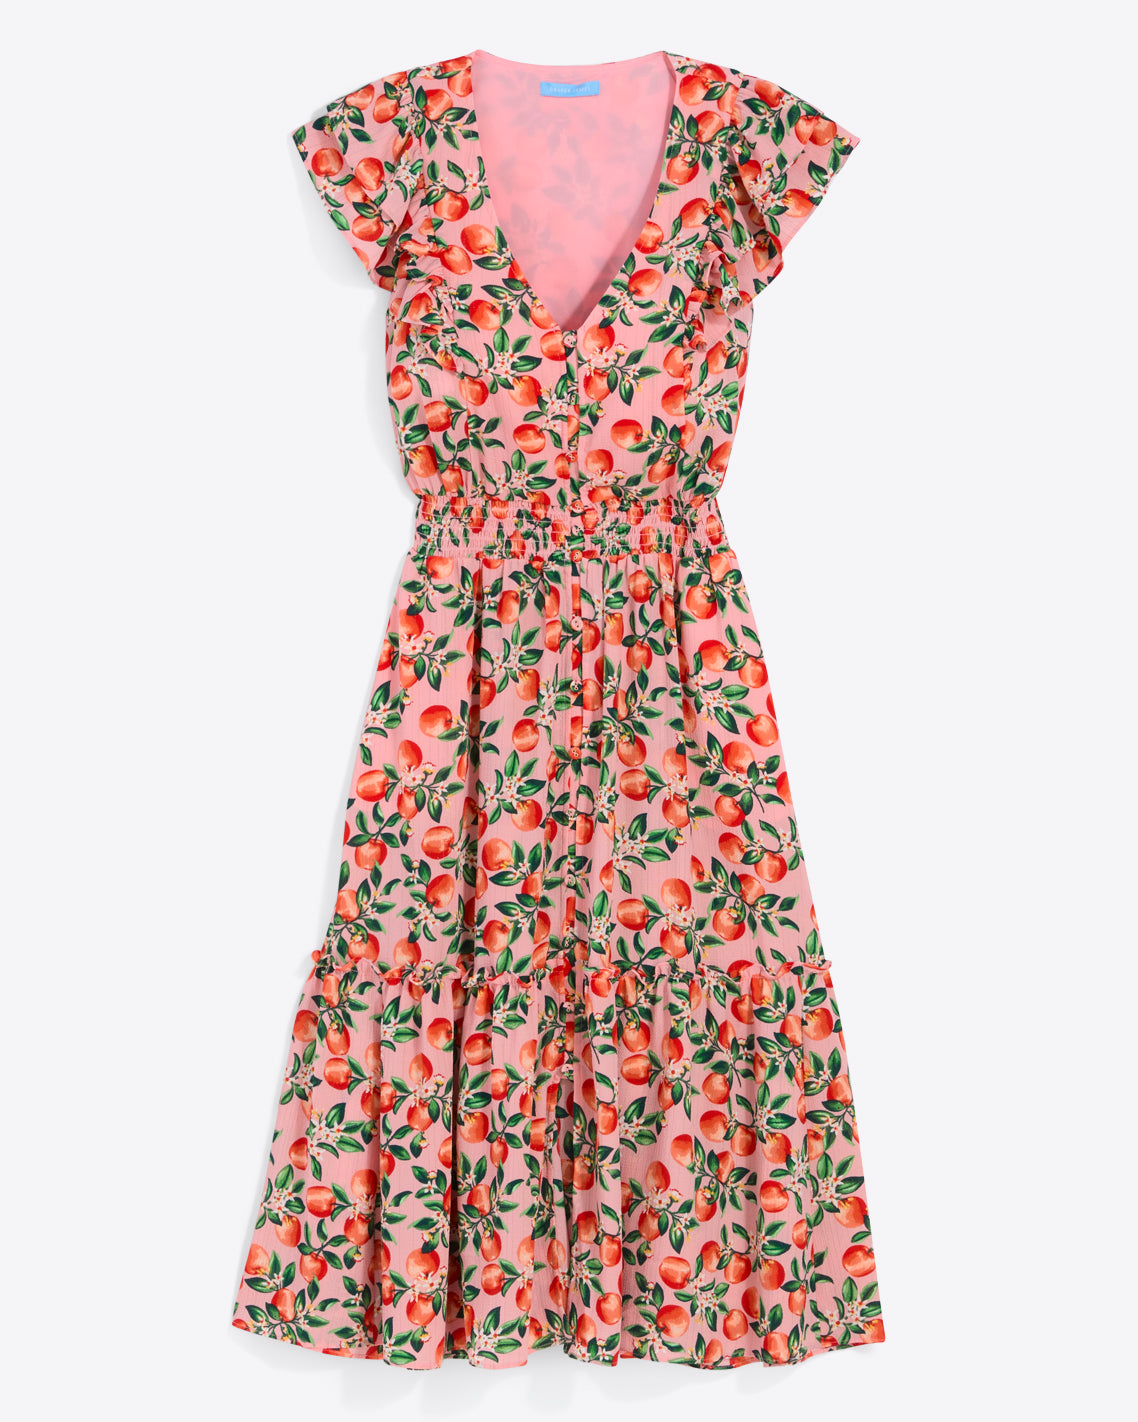 Marie Midi Dress in Apple Blossom Floral